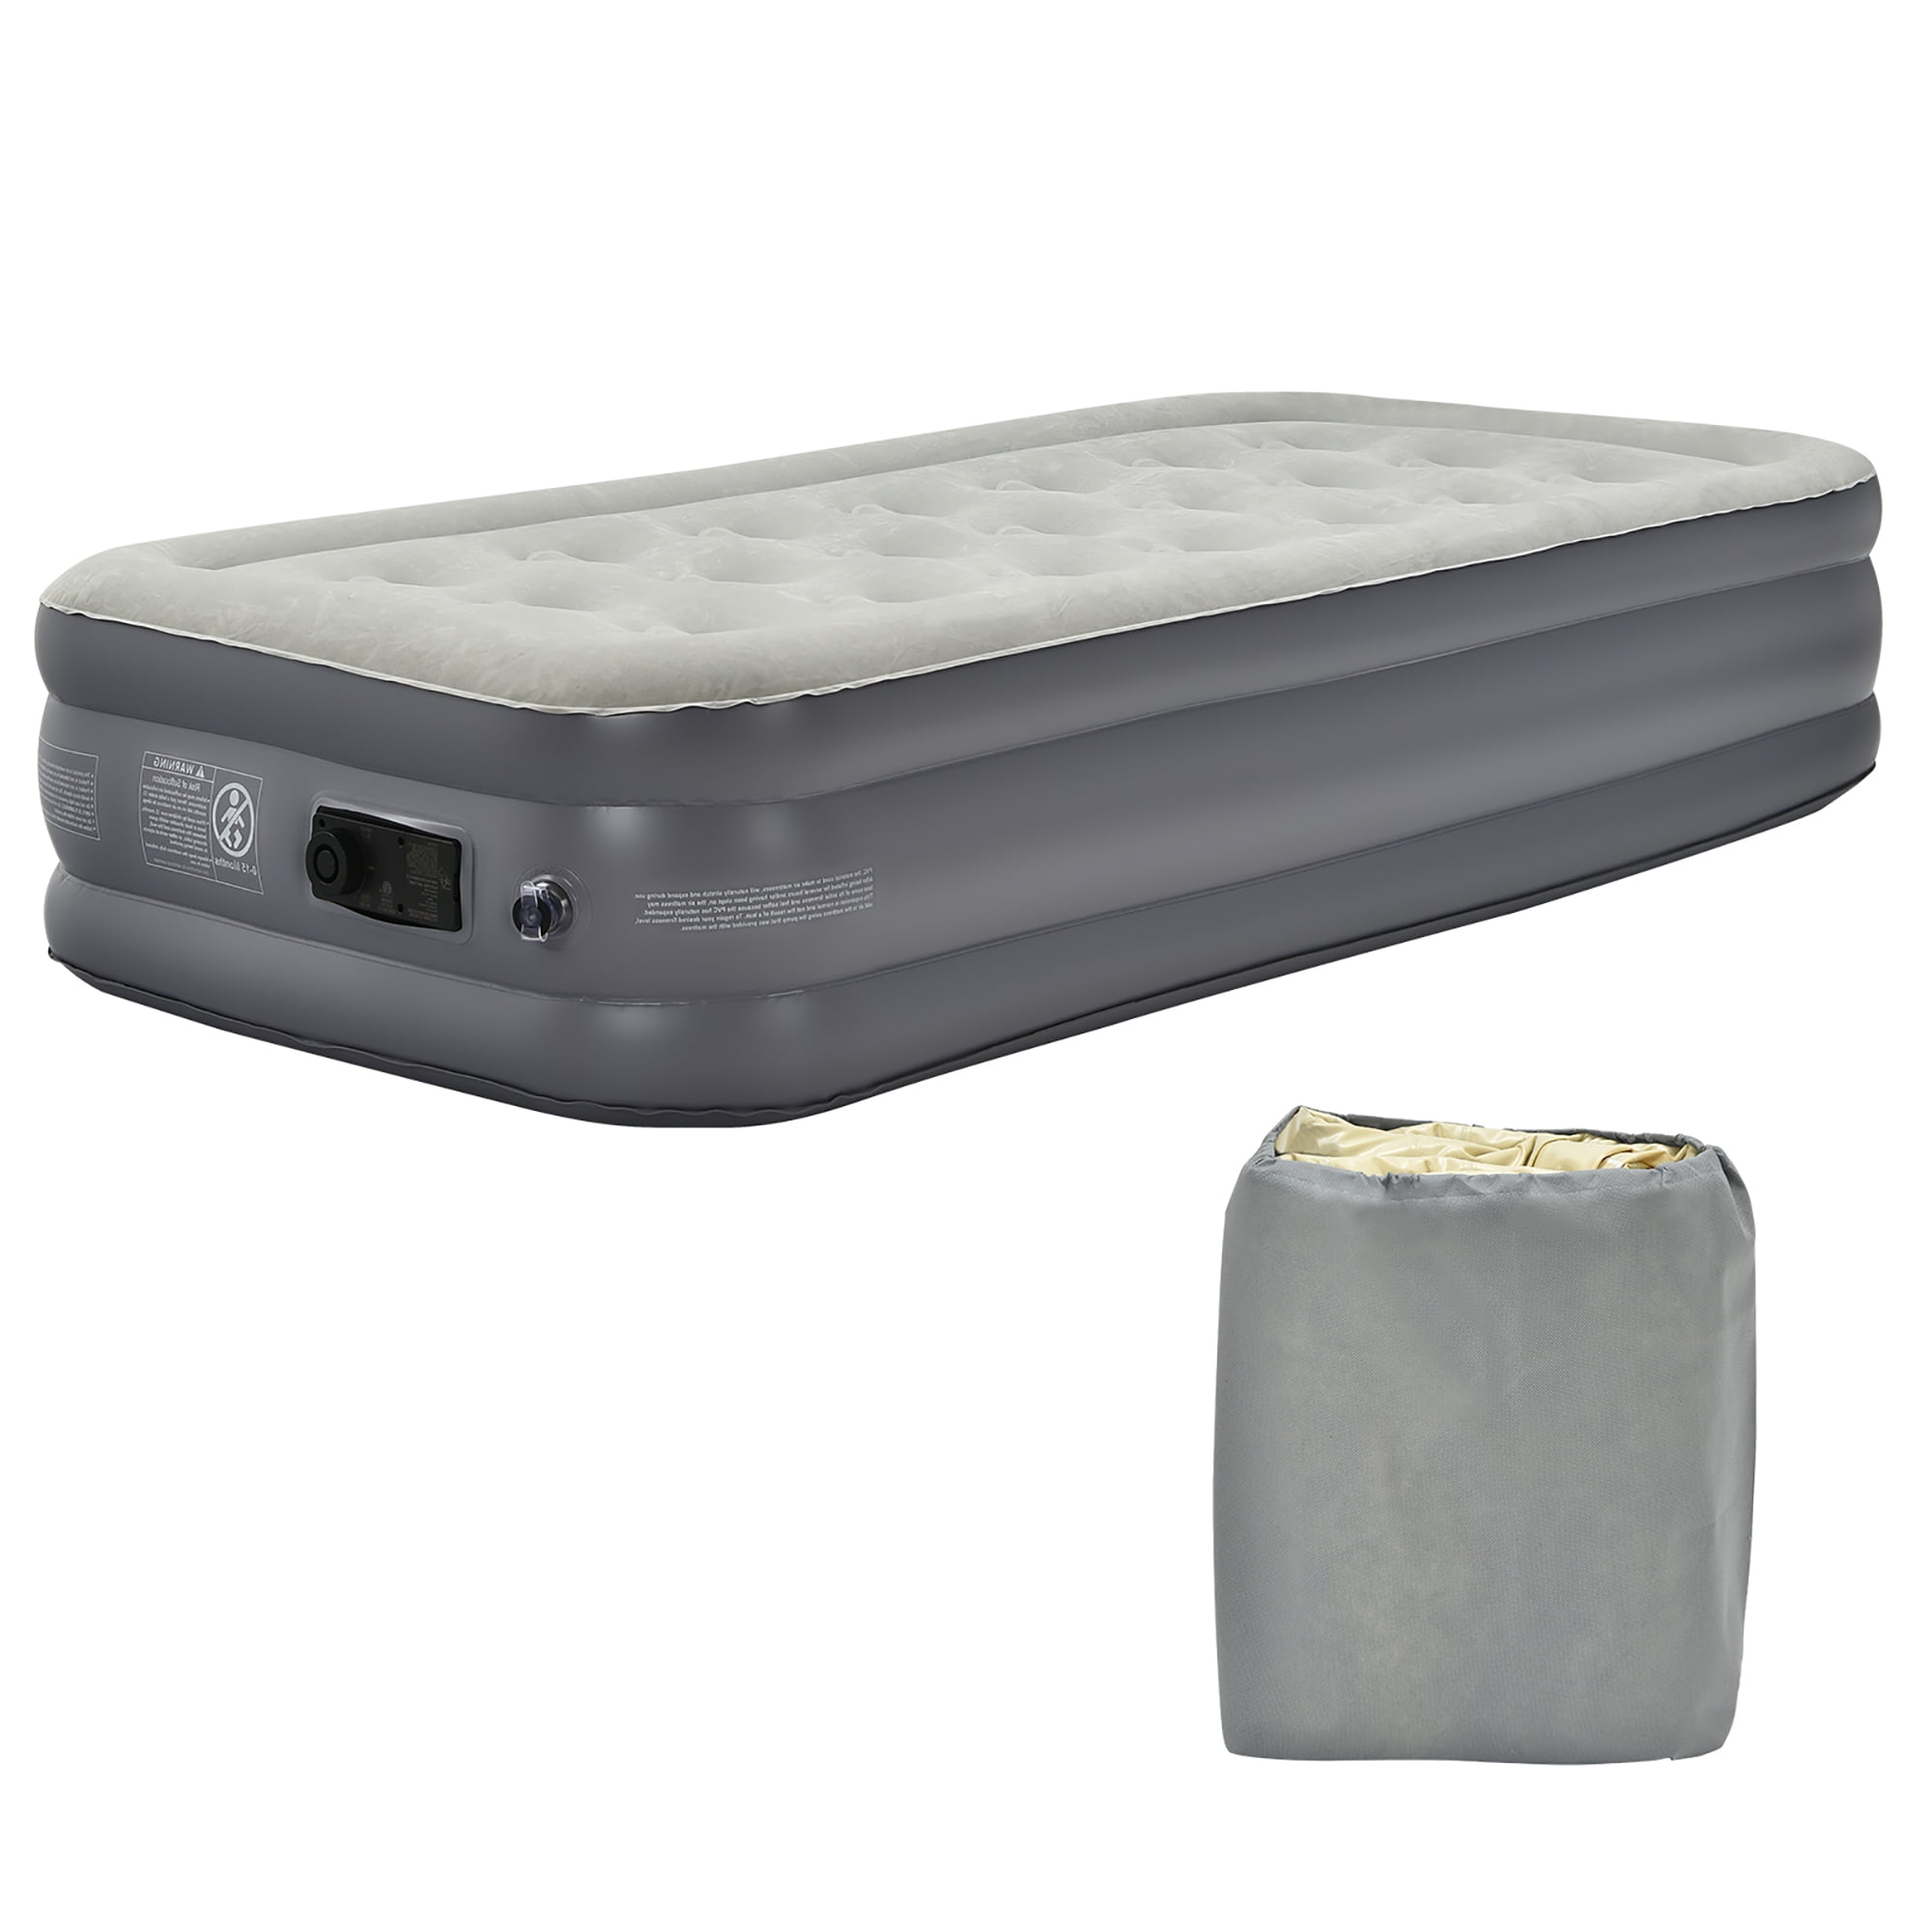 Details about   Giantex Queen Air Bed Inflatable Mattress Built-In Pump Portable Bag Camping 